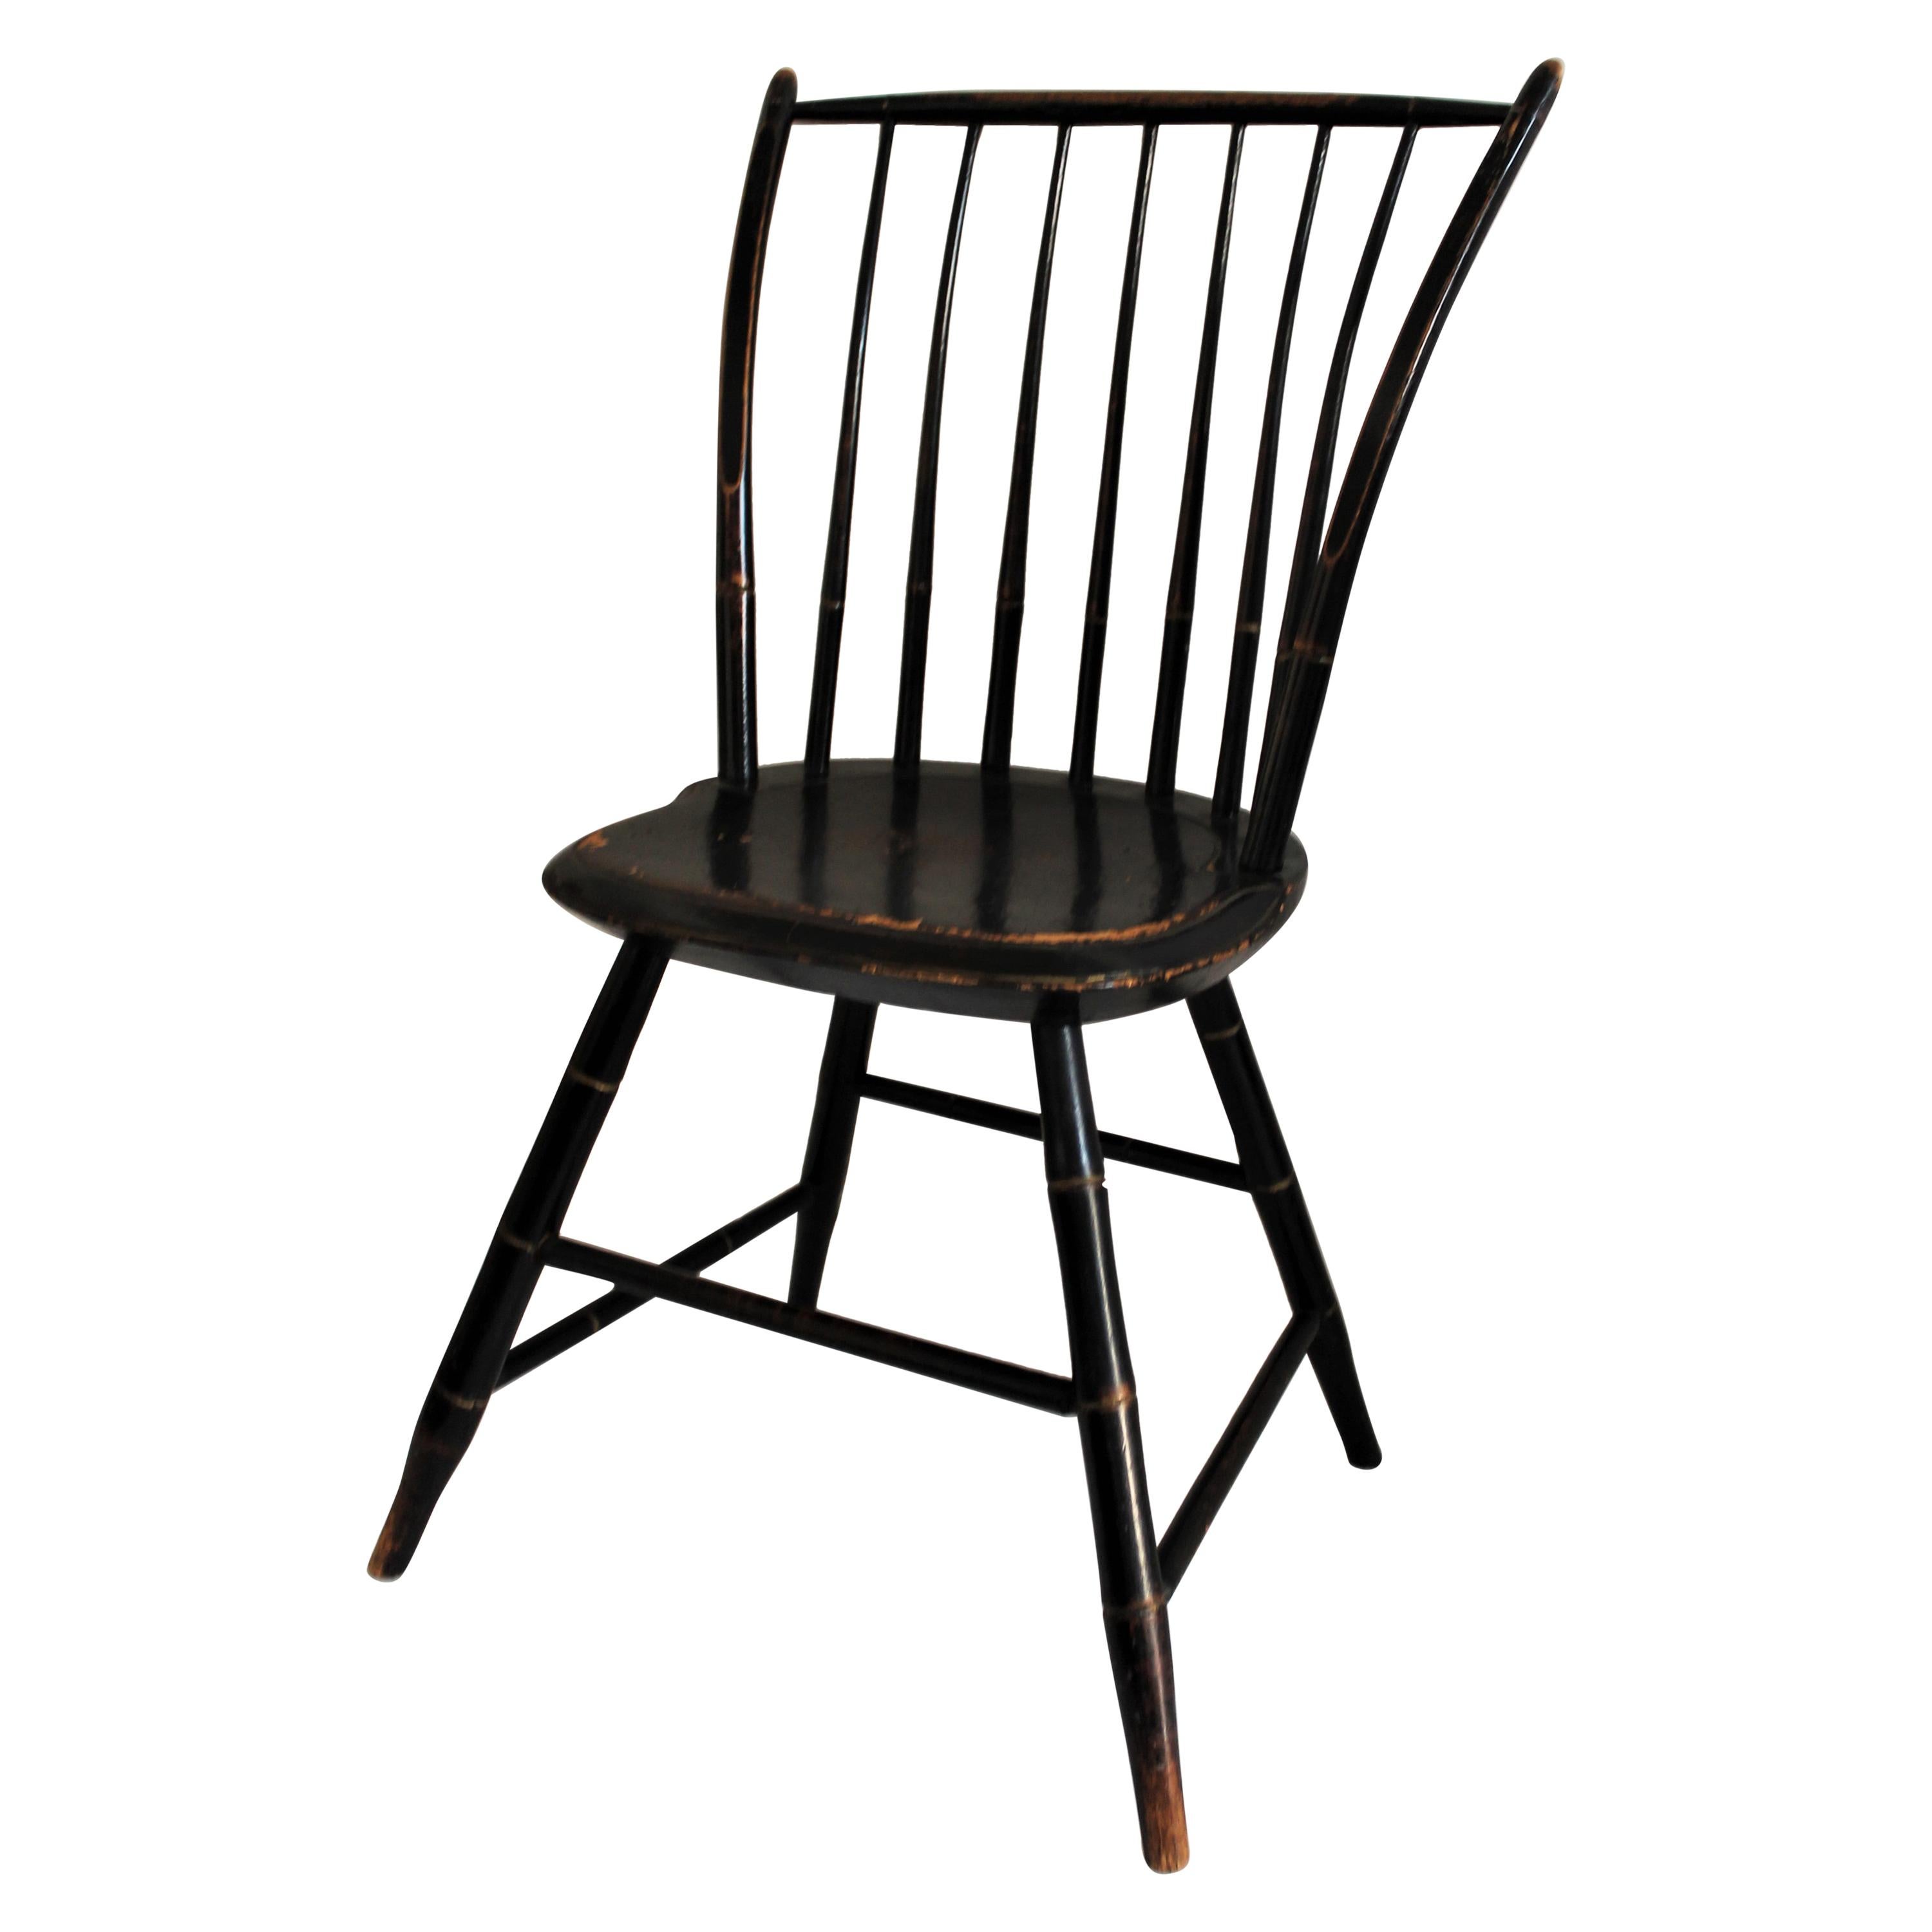 Early 19th Century Windsor Chair in Original Black Paint For Sale